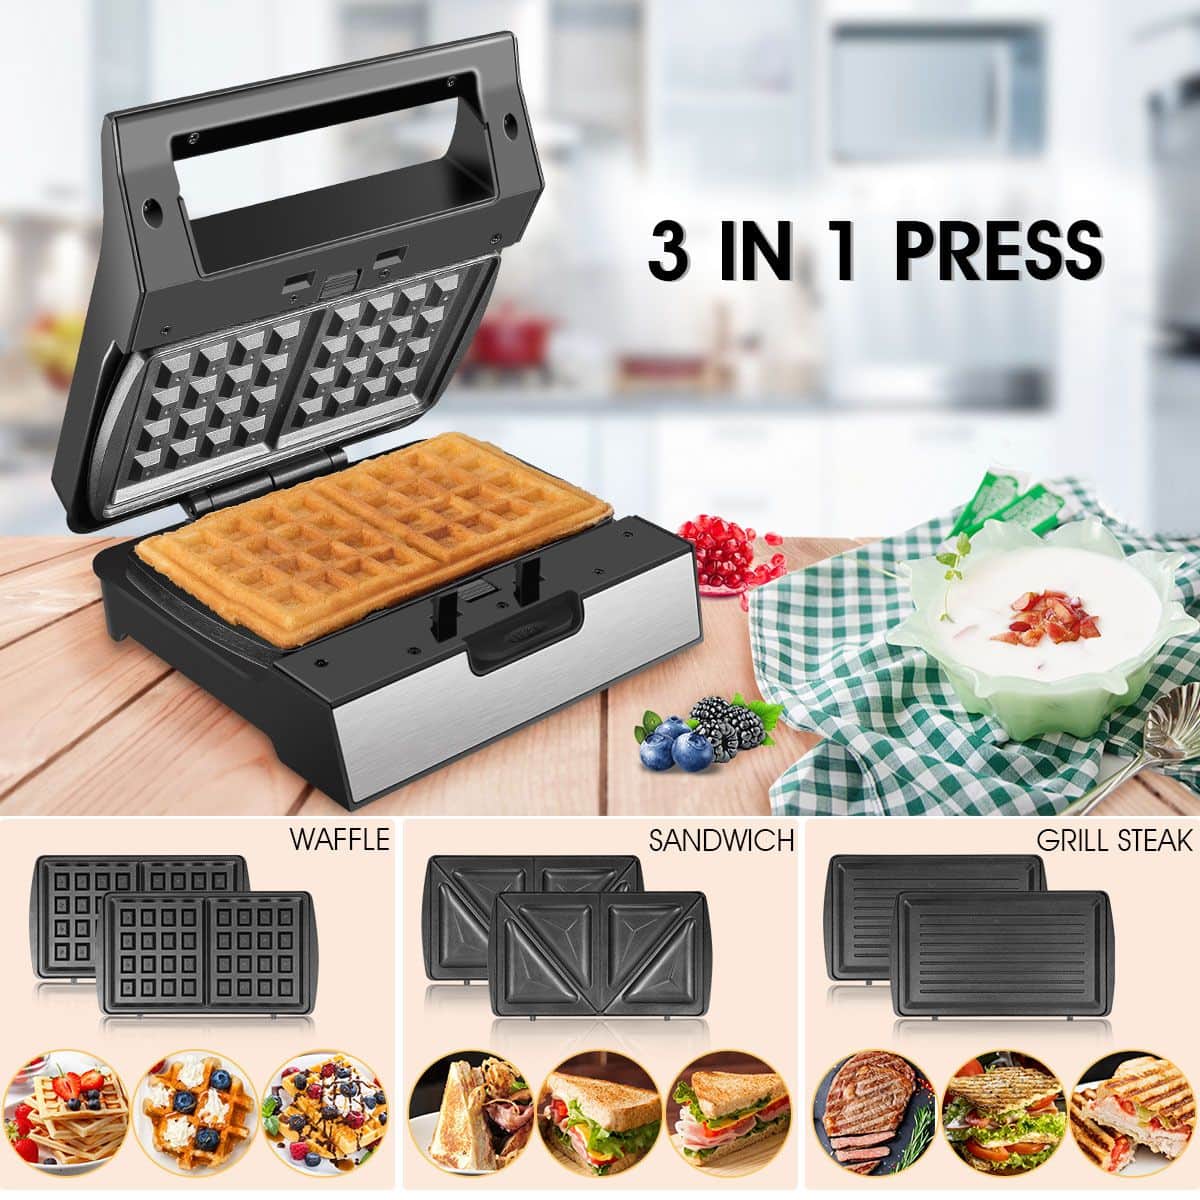 3 in 1 panini press with waffles inside and all plates showing